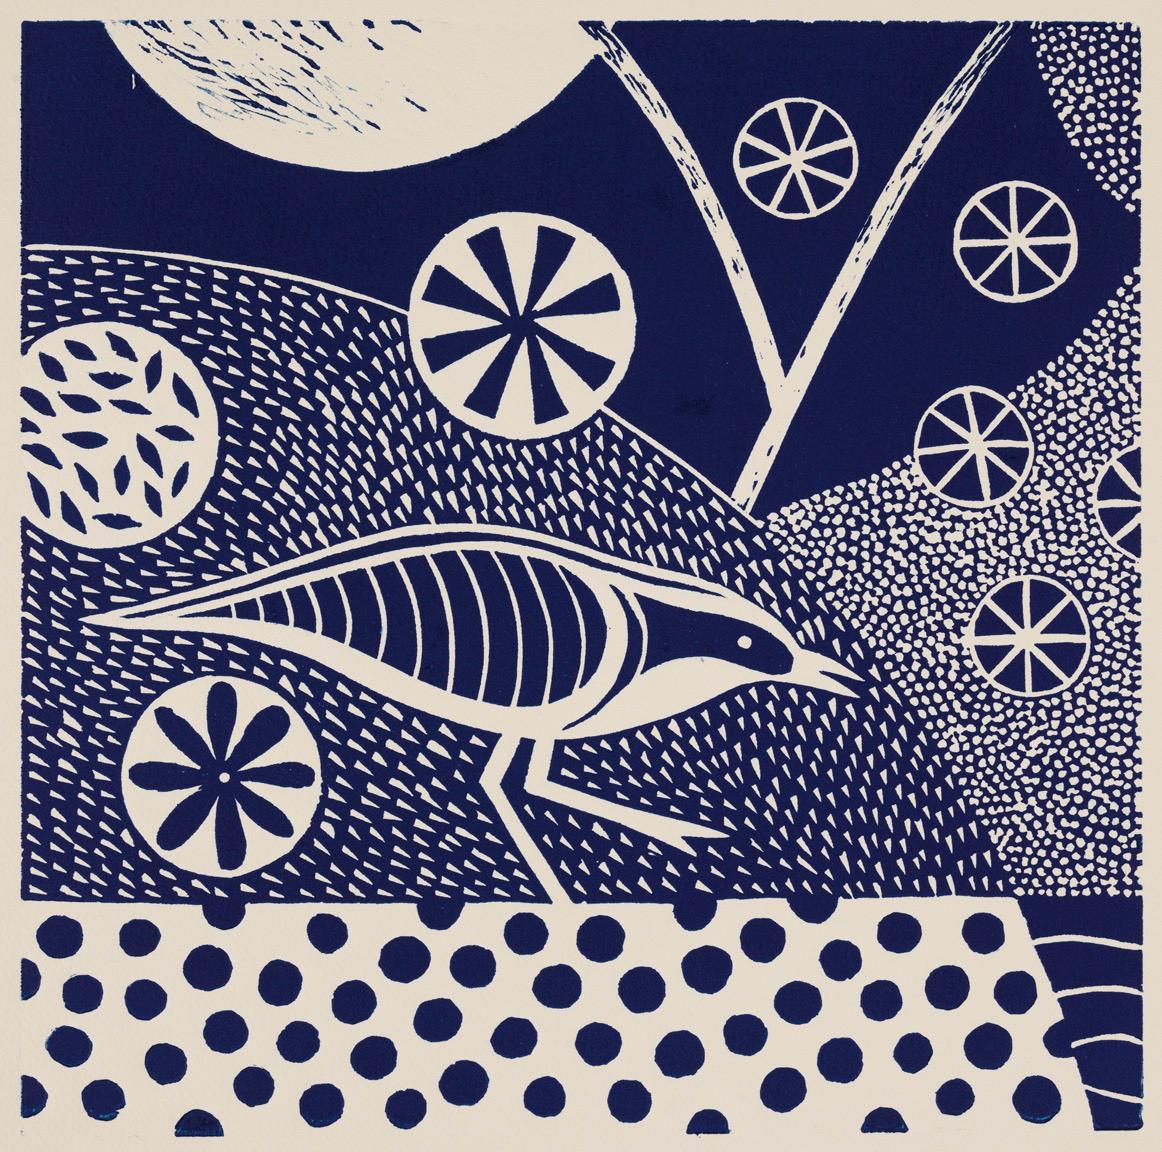 'Chittering and Chattering II'  Linoleum Block Print,  Edition 10,  11 5/8 x 11 5/8 Inches, is one of a series of 6 related prints in this size in varying shades of blue.   Sold individually or as sets of 2, 3, 4, 5 or 6.

There is also a series of